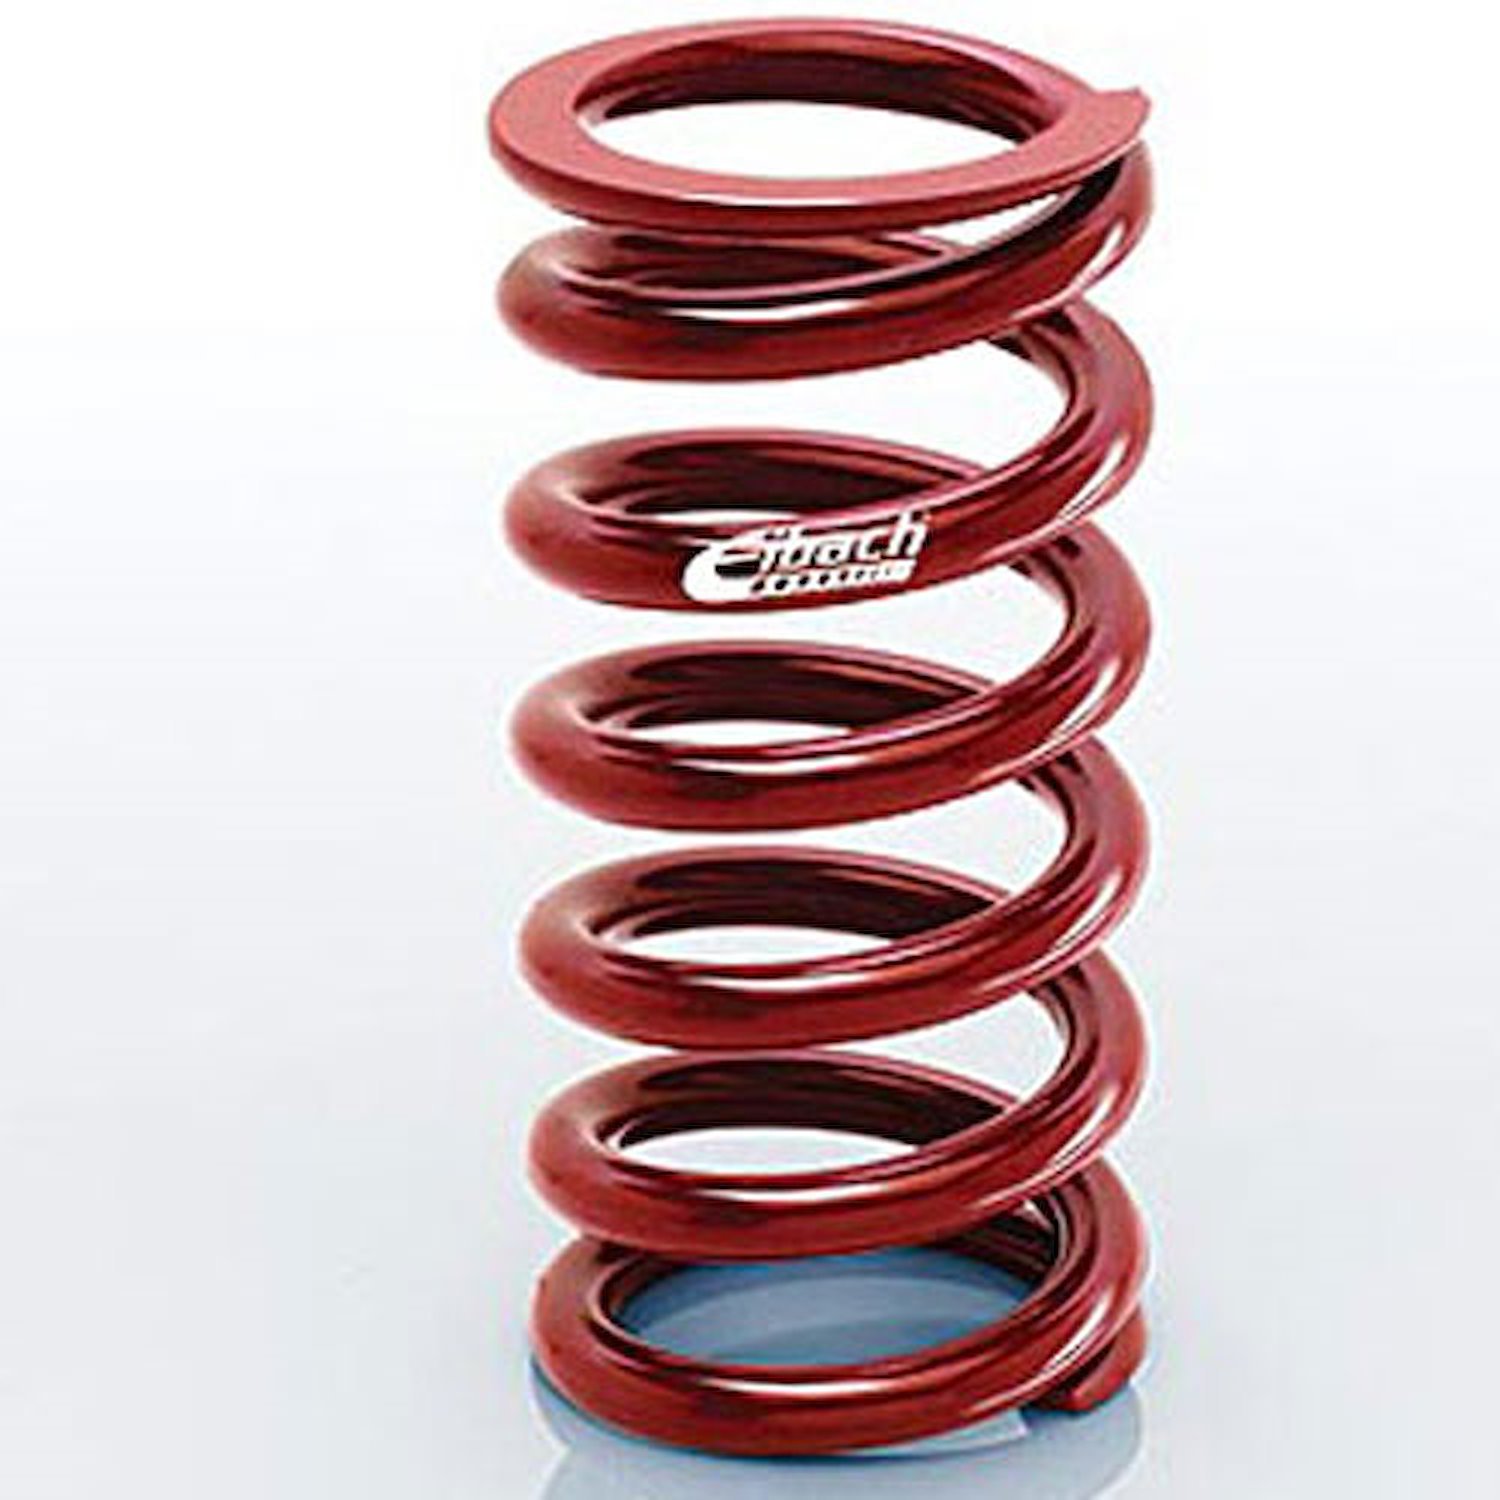 0950.500.0550 EIBACH CONVENTIONAL FRONT SPRING